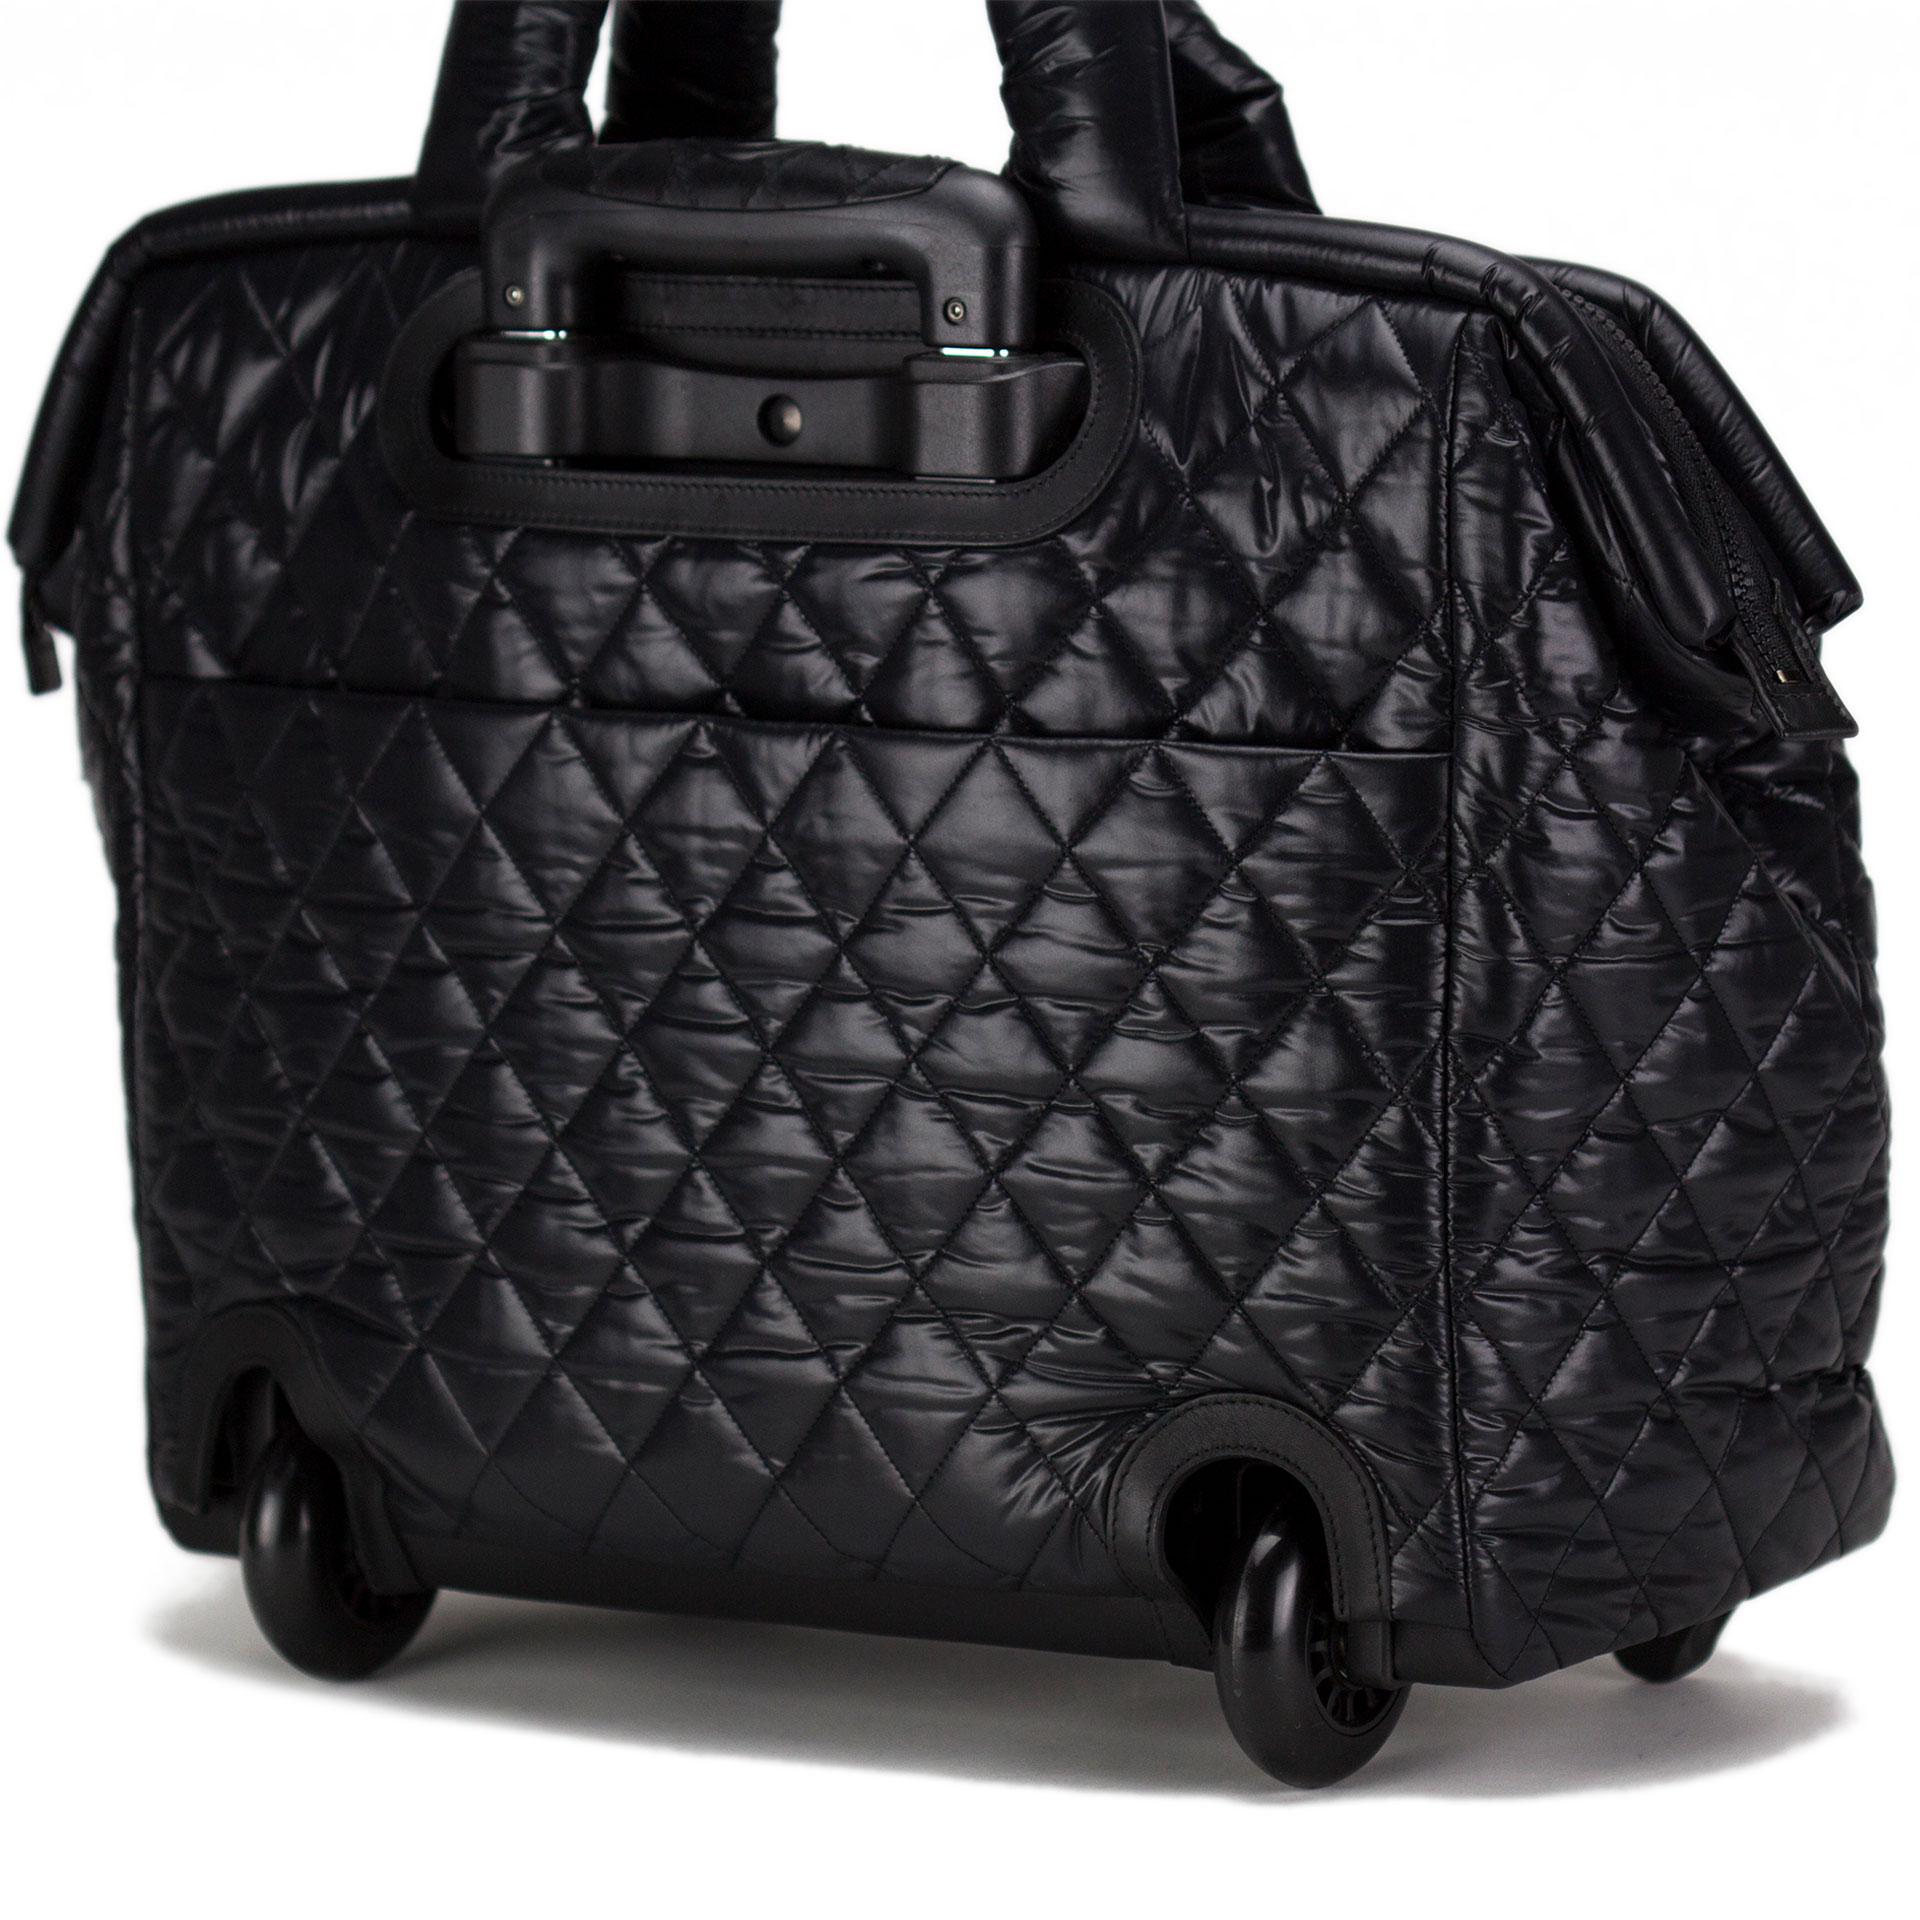 Chanel 2012 Coco Cocoon Quilted Case Carry On Trolley Travel Black Luggage Bag For Sale 4